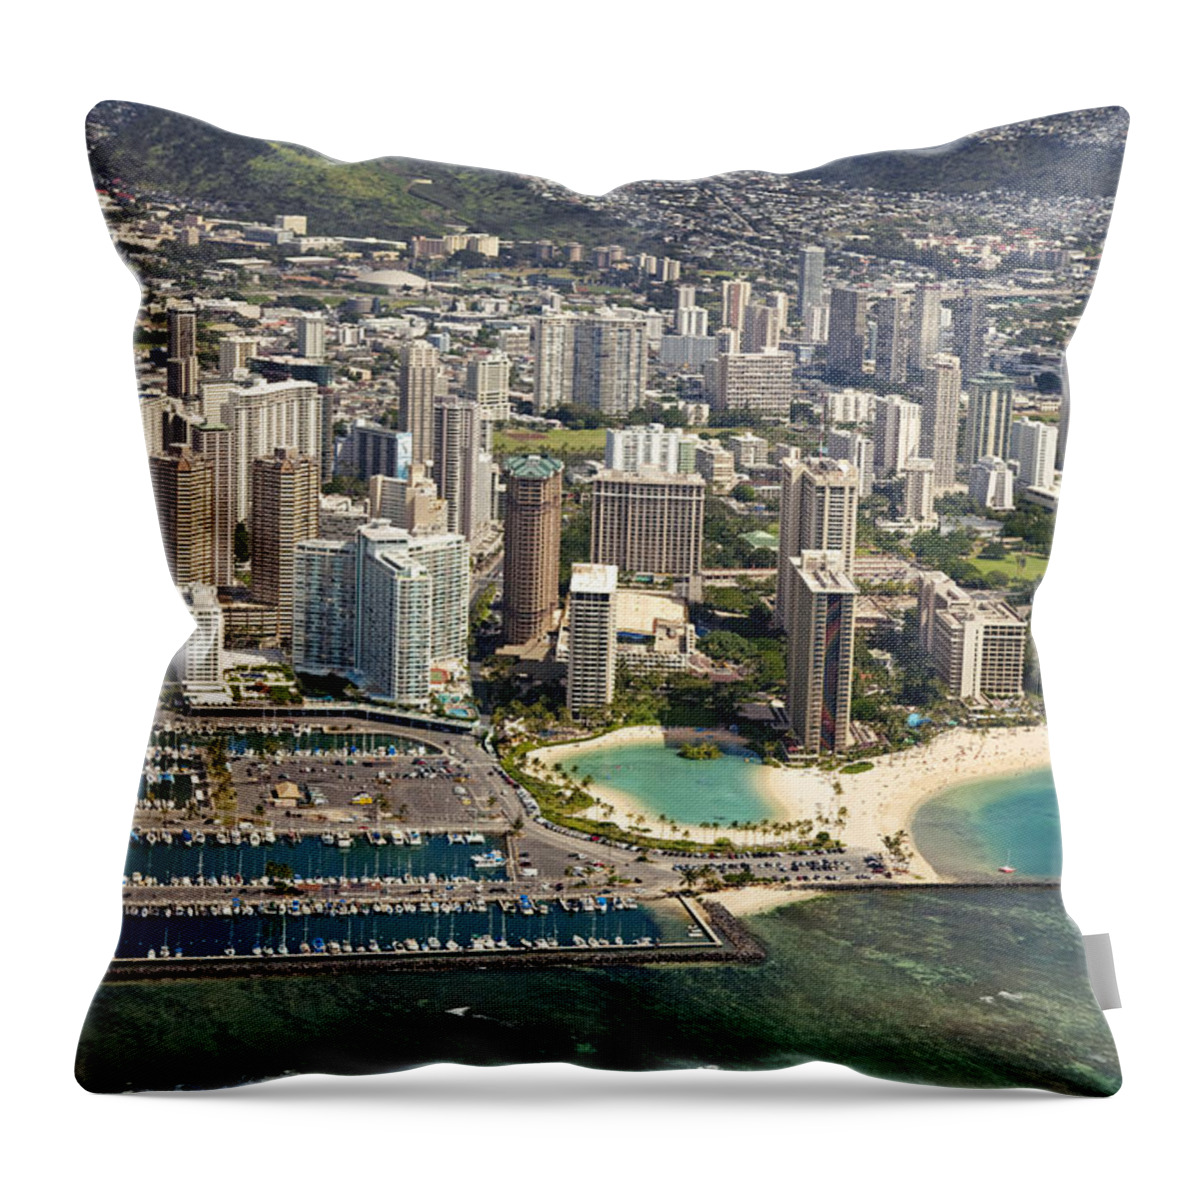 Above Throw Pillow featuring the photograph Aerial of Waikiki by Ron Dahlquist - Printscapes